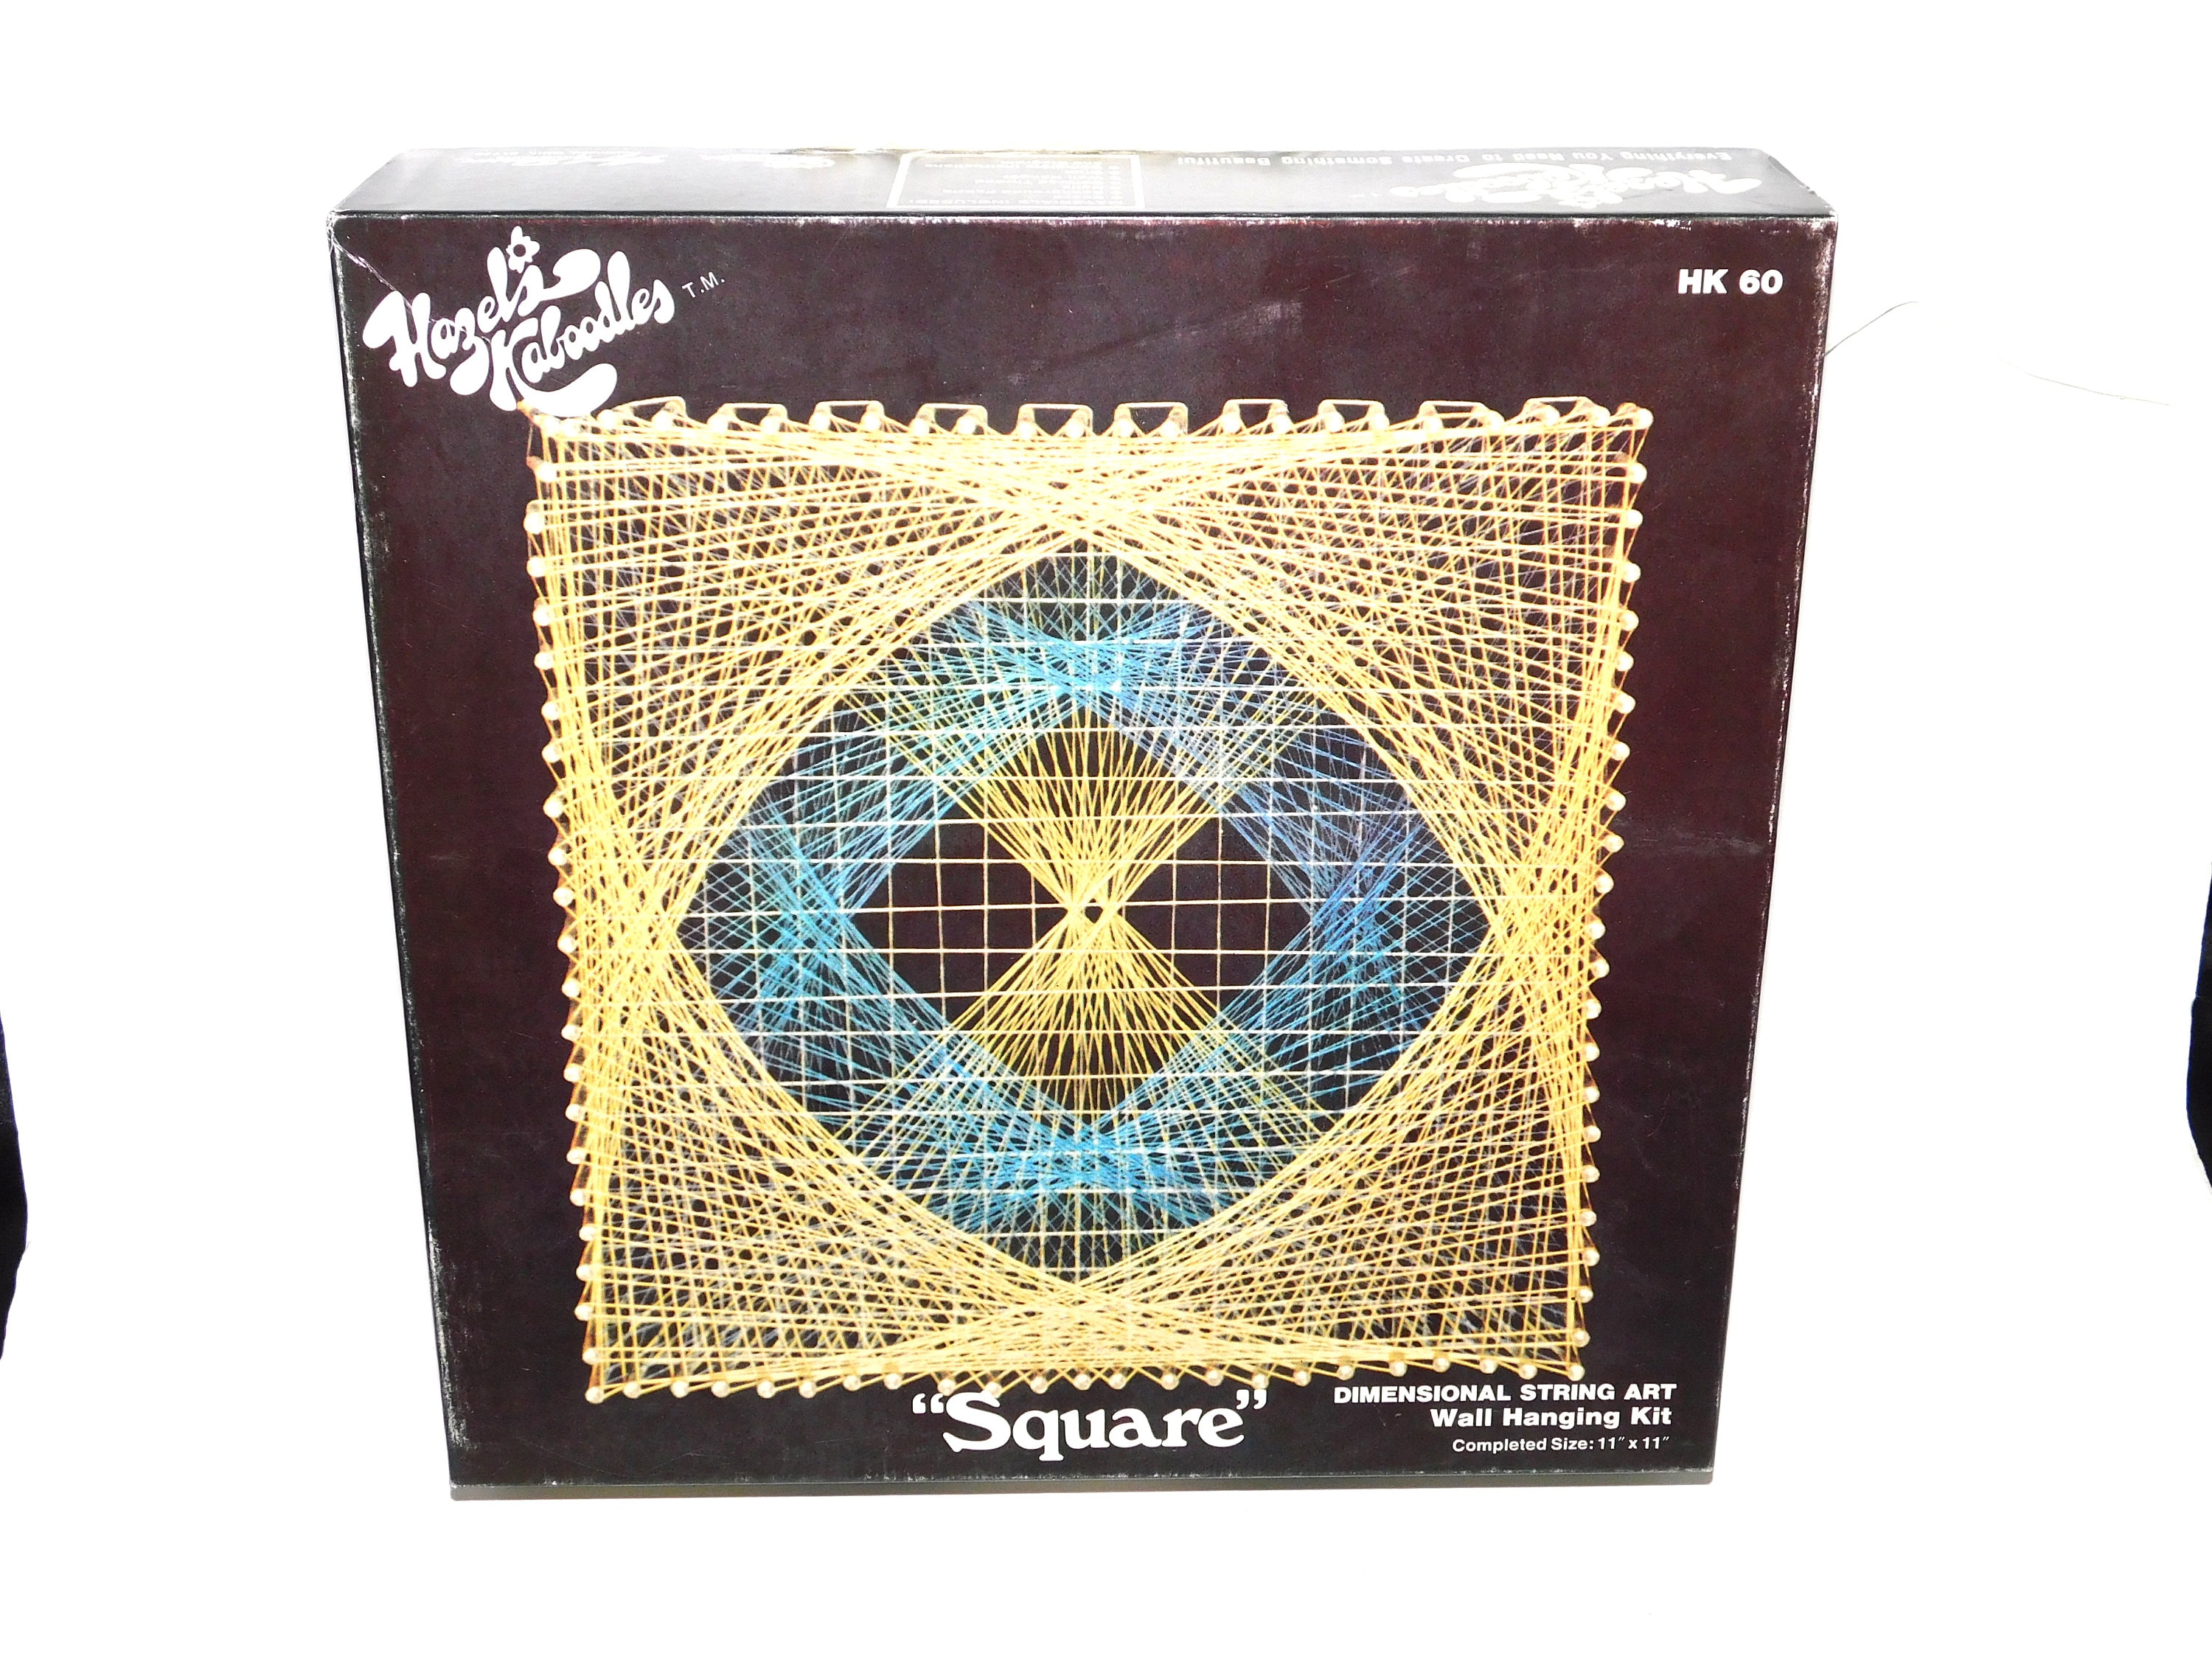 Wood Stitched String Art Kit with Shadow Box Vortex - adult or kids craft -  craft kits for teens - string art kit for adults - 3d string art - 3d string